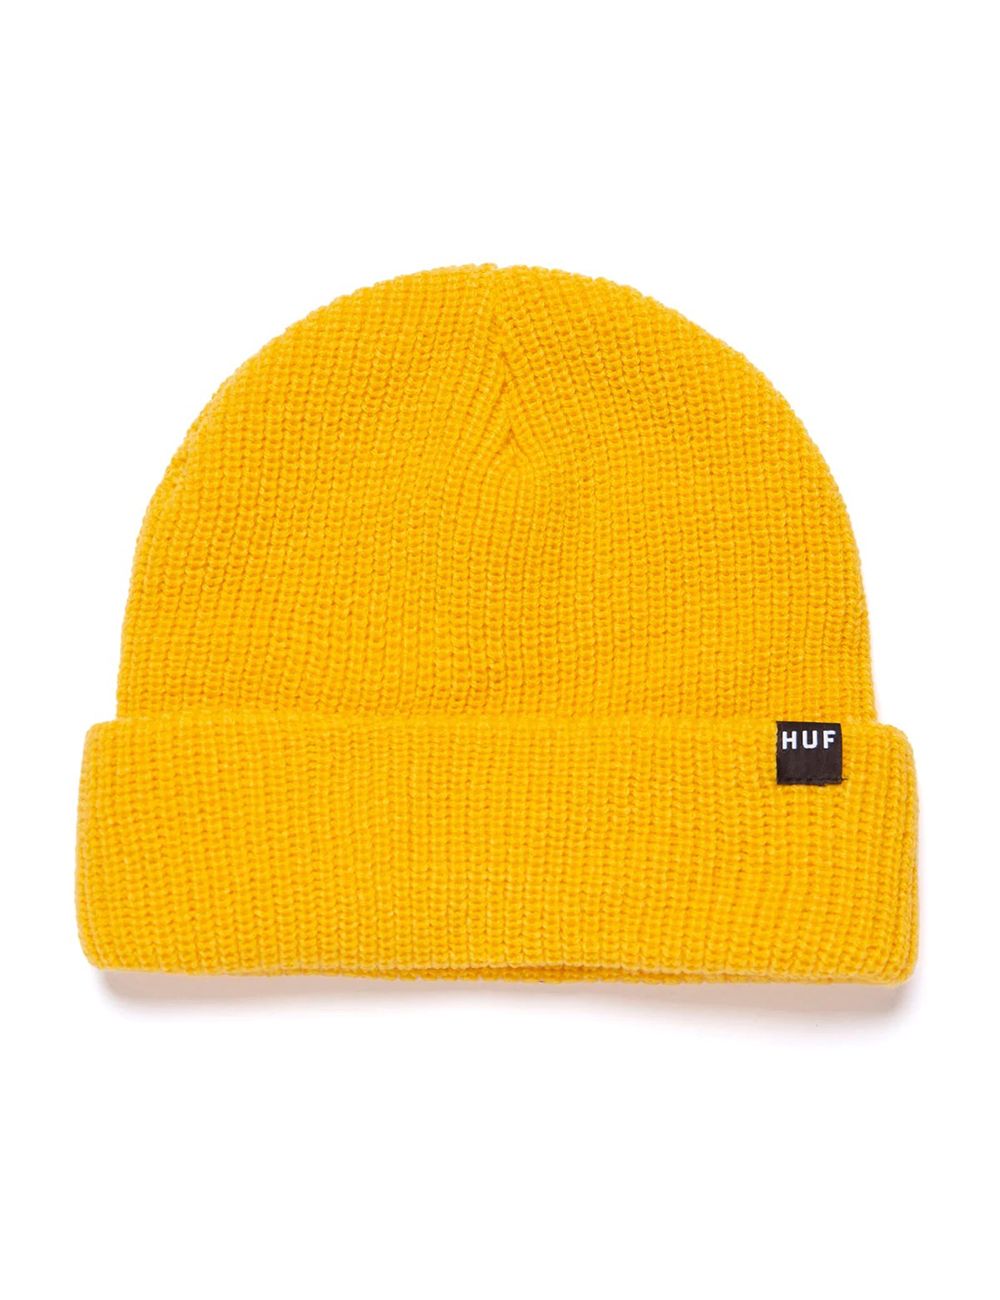 Huf ESSENTIAL USUAL BEANIE gold